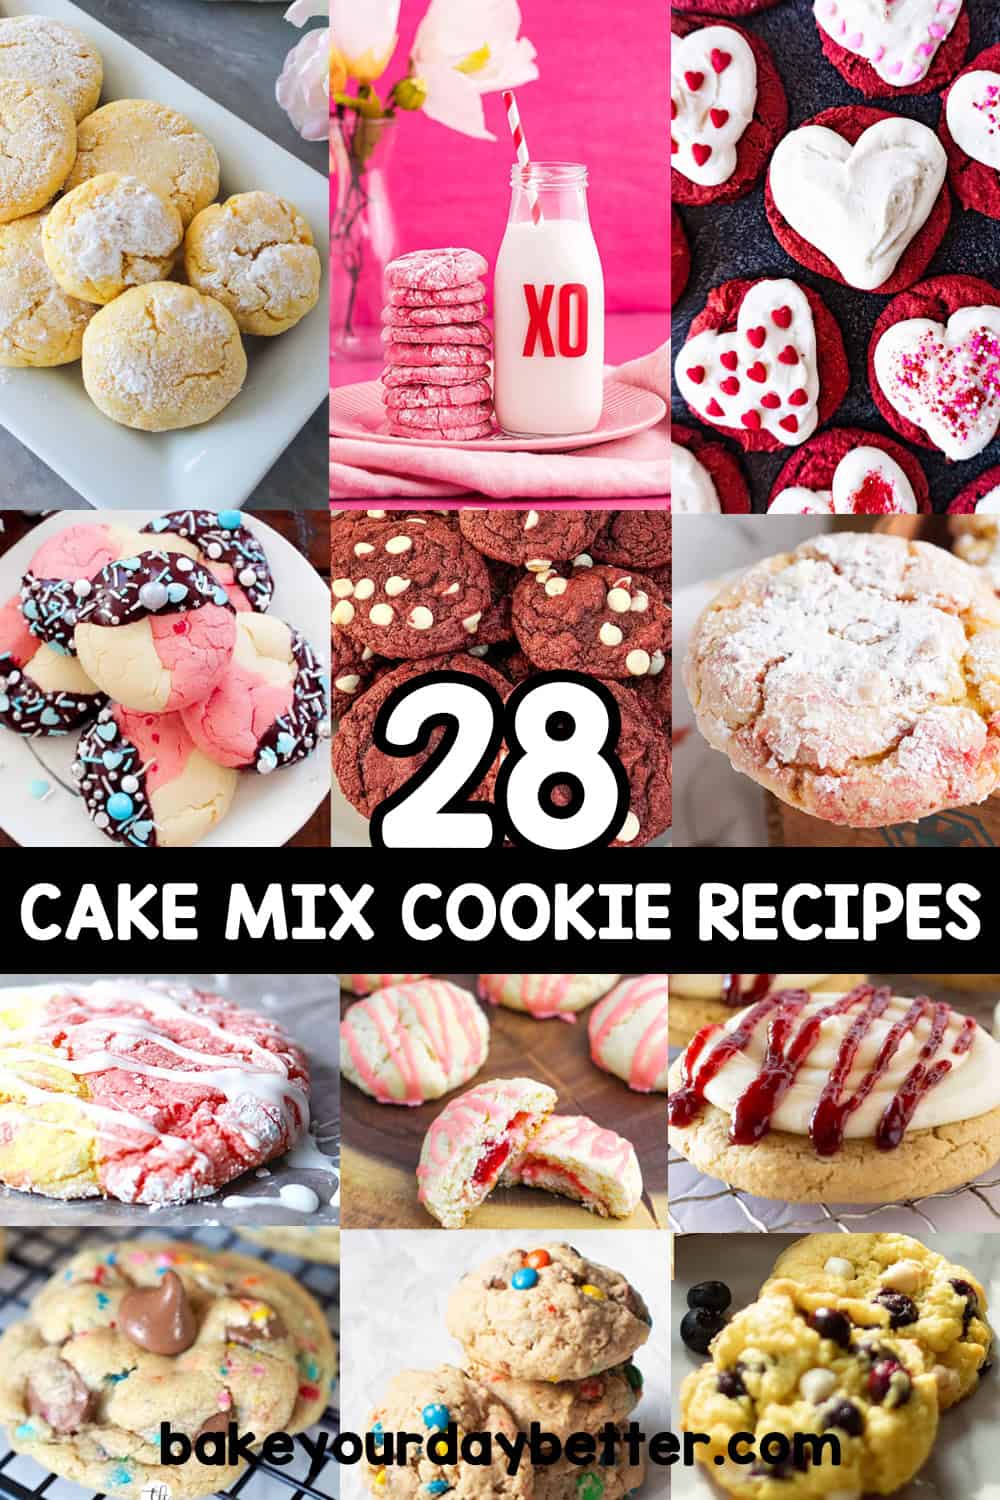 cake mix cookies with text overlay that says: 28 cake mix cookie recipes